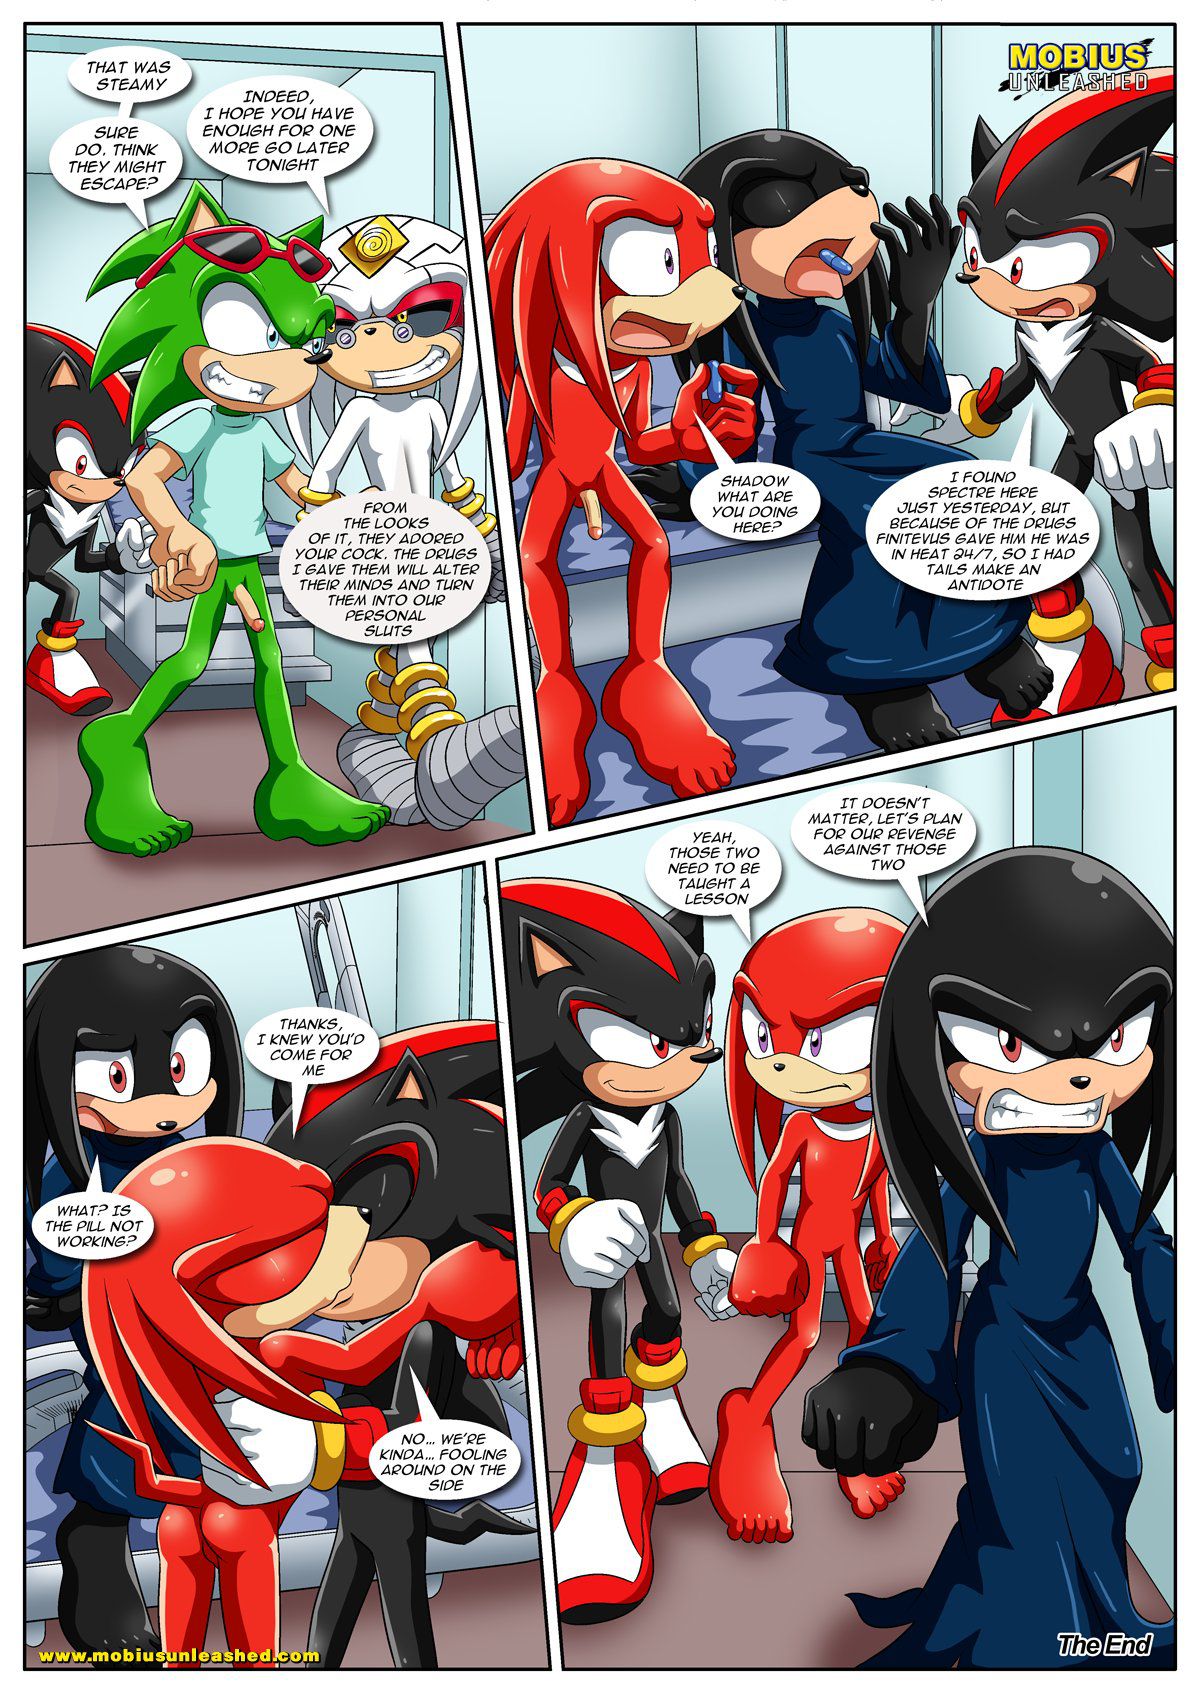 [Palcomix] The Doctor Will See You Now 2 (Sonic The Hedgehog) [Ongoing] 14